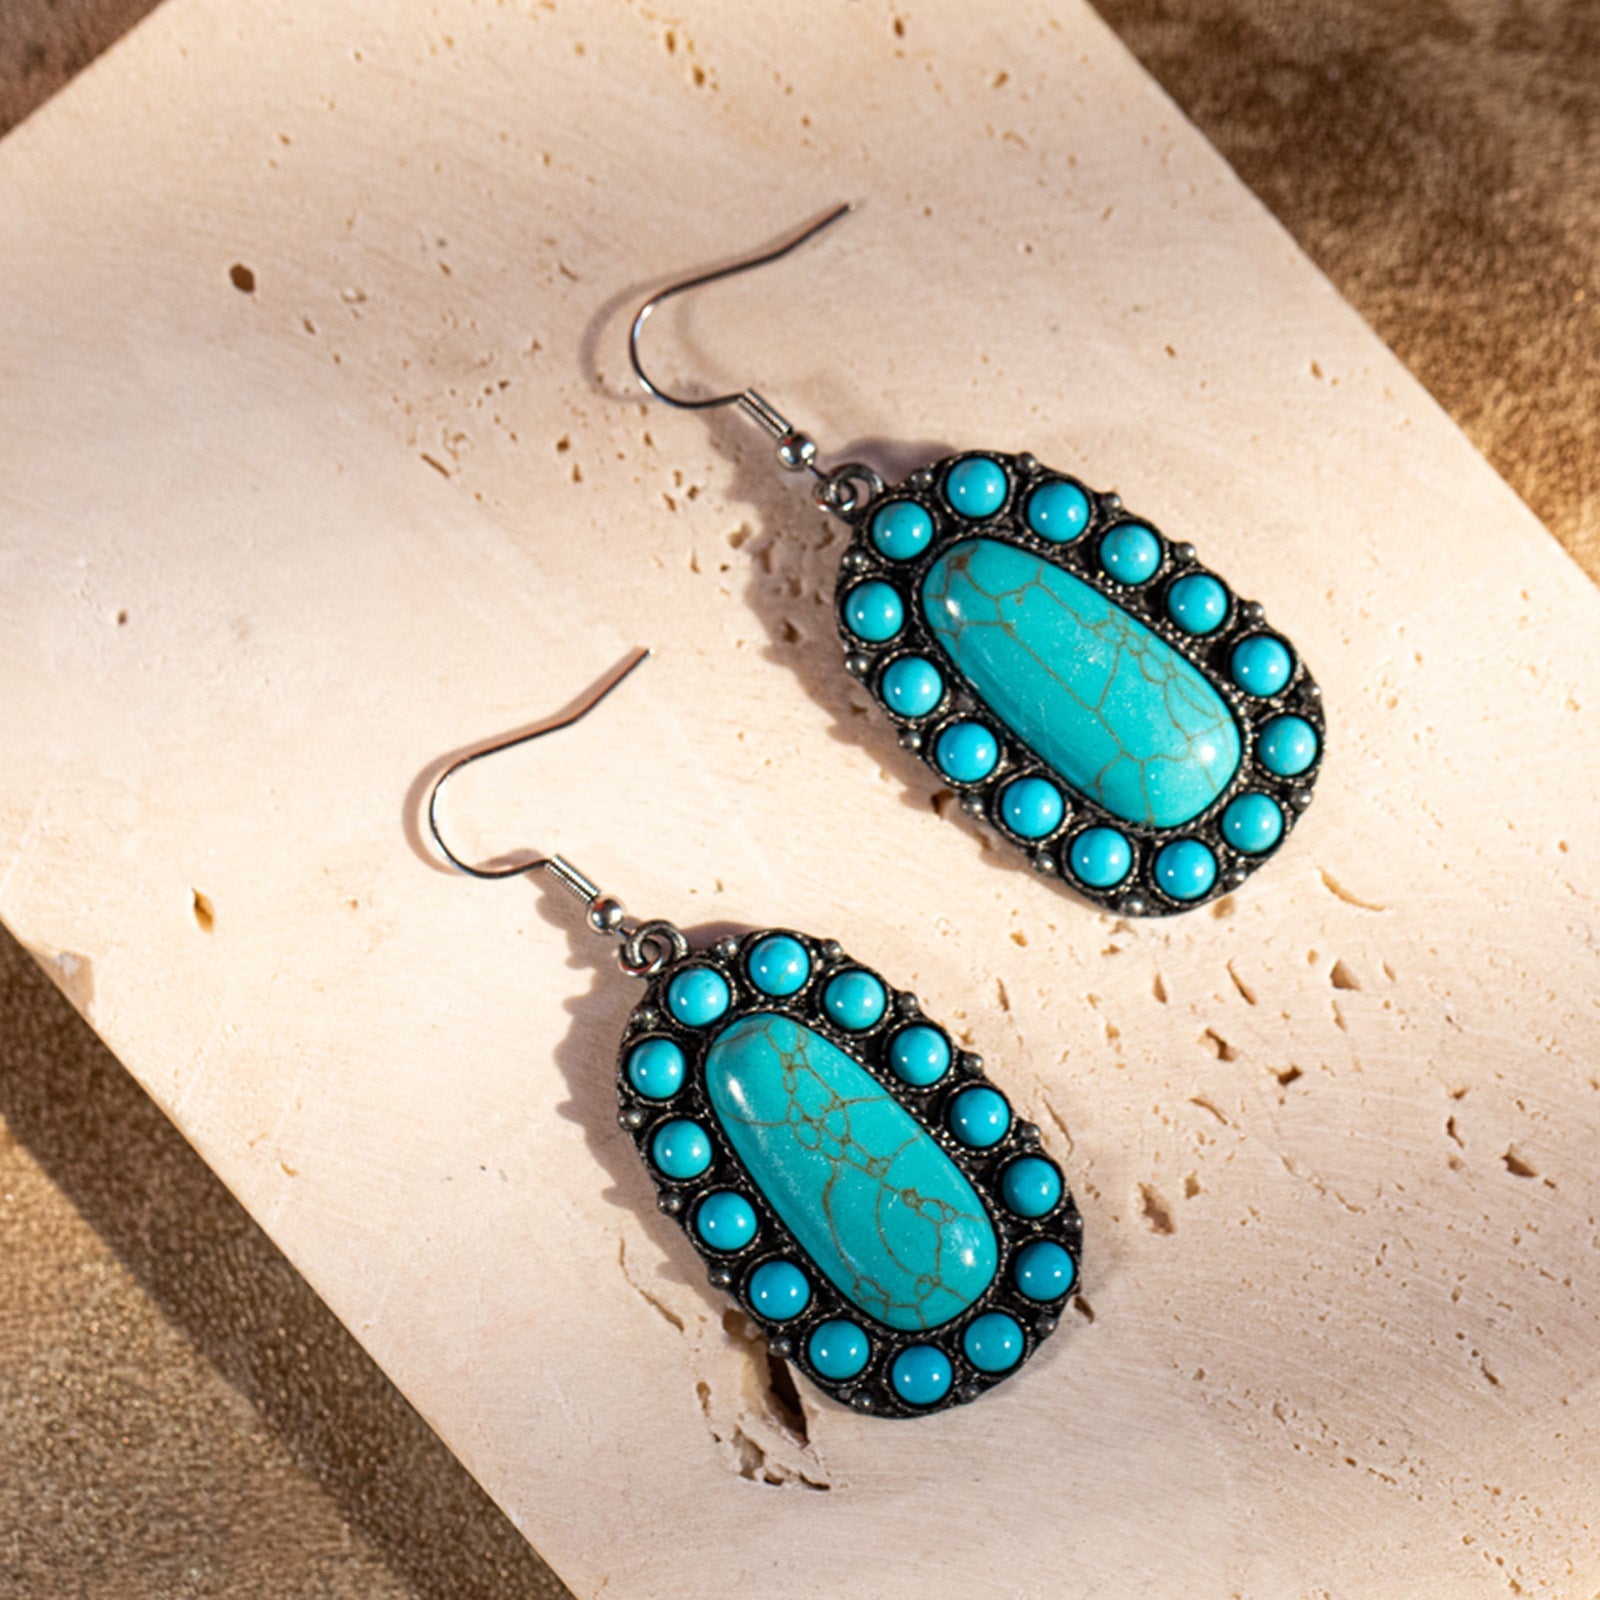 Rustic Couture Bohemian Turquoise Stone Tear Drop Earrings - Montana West World